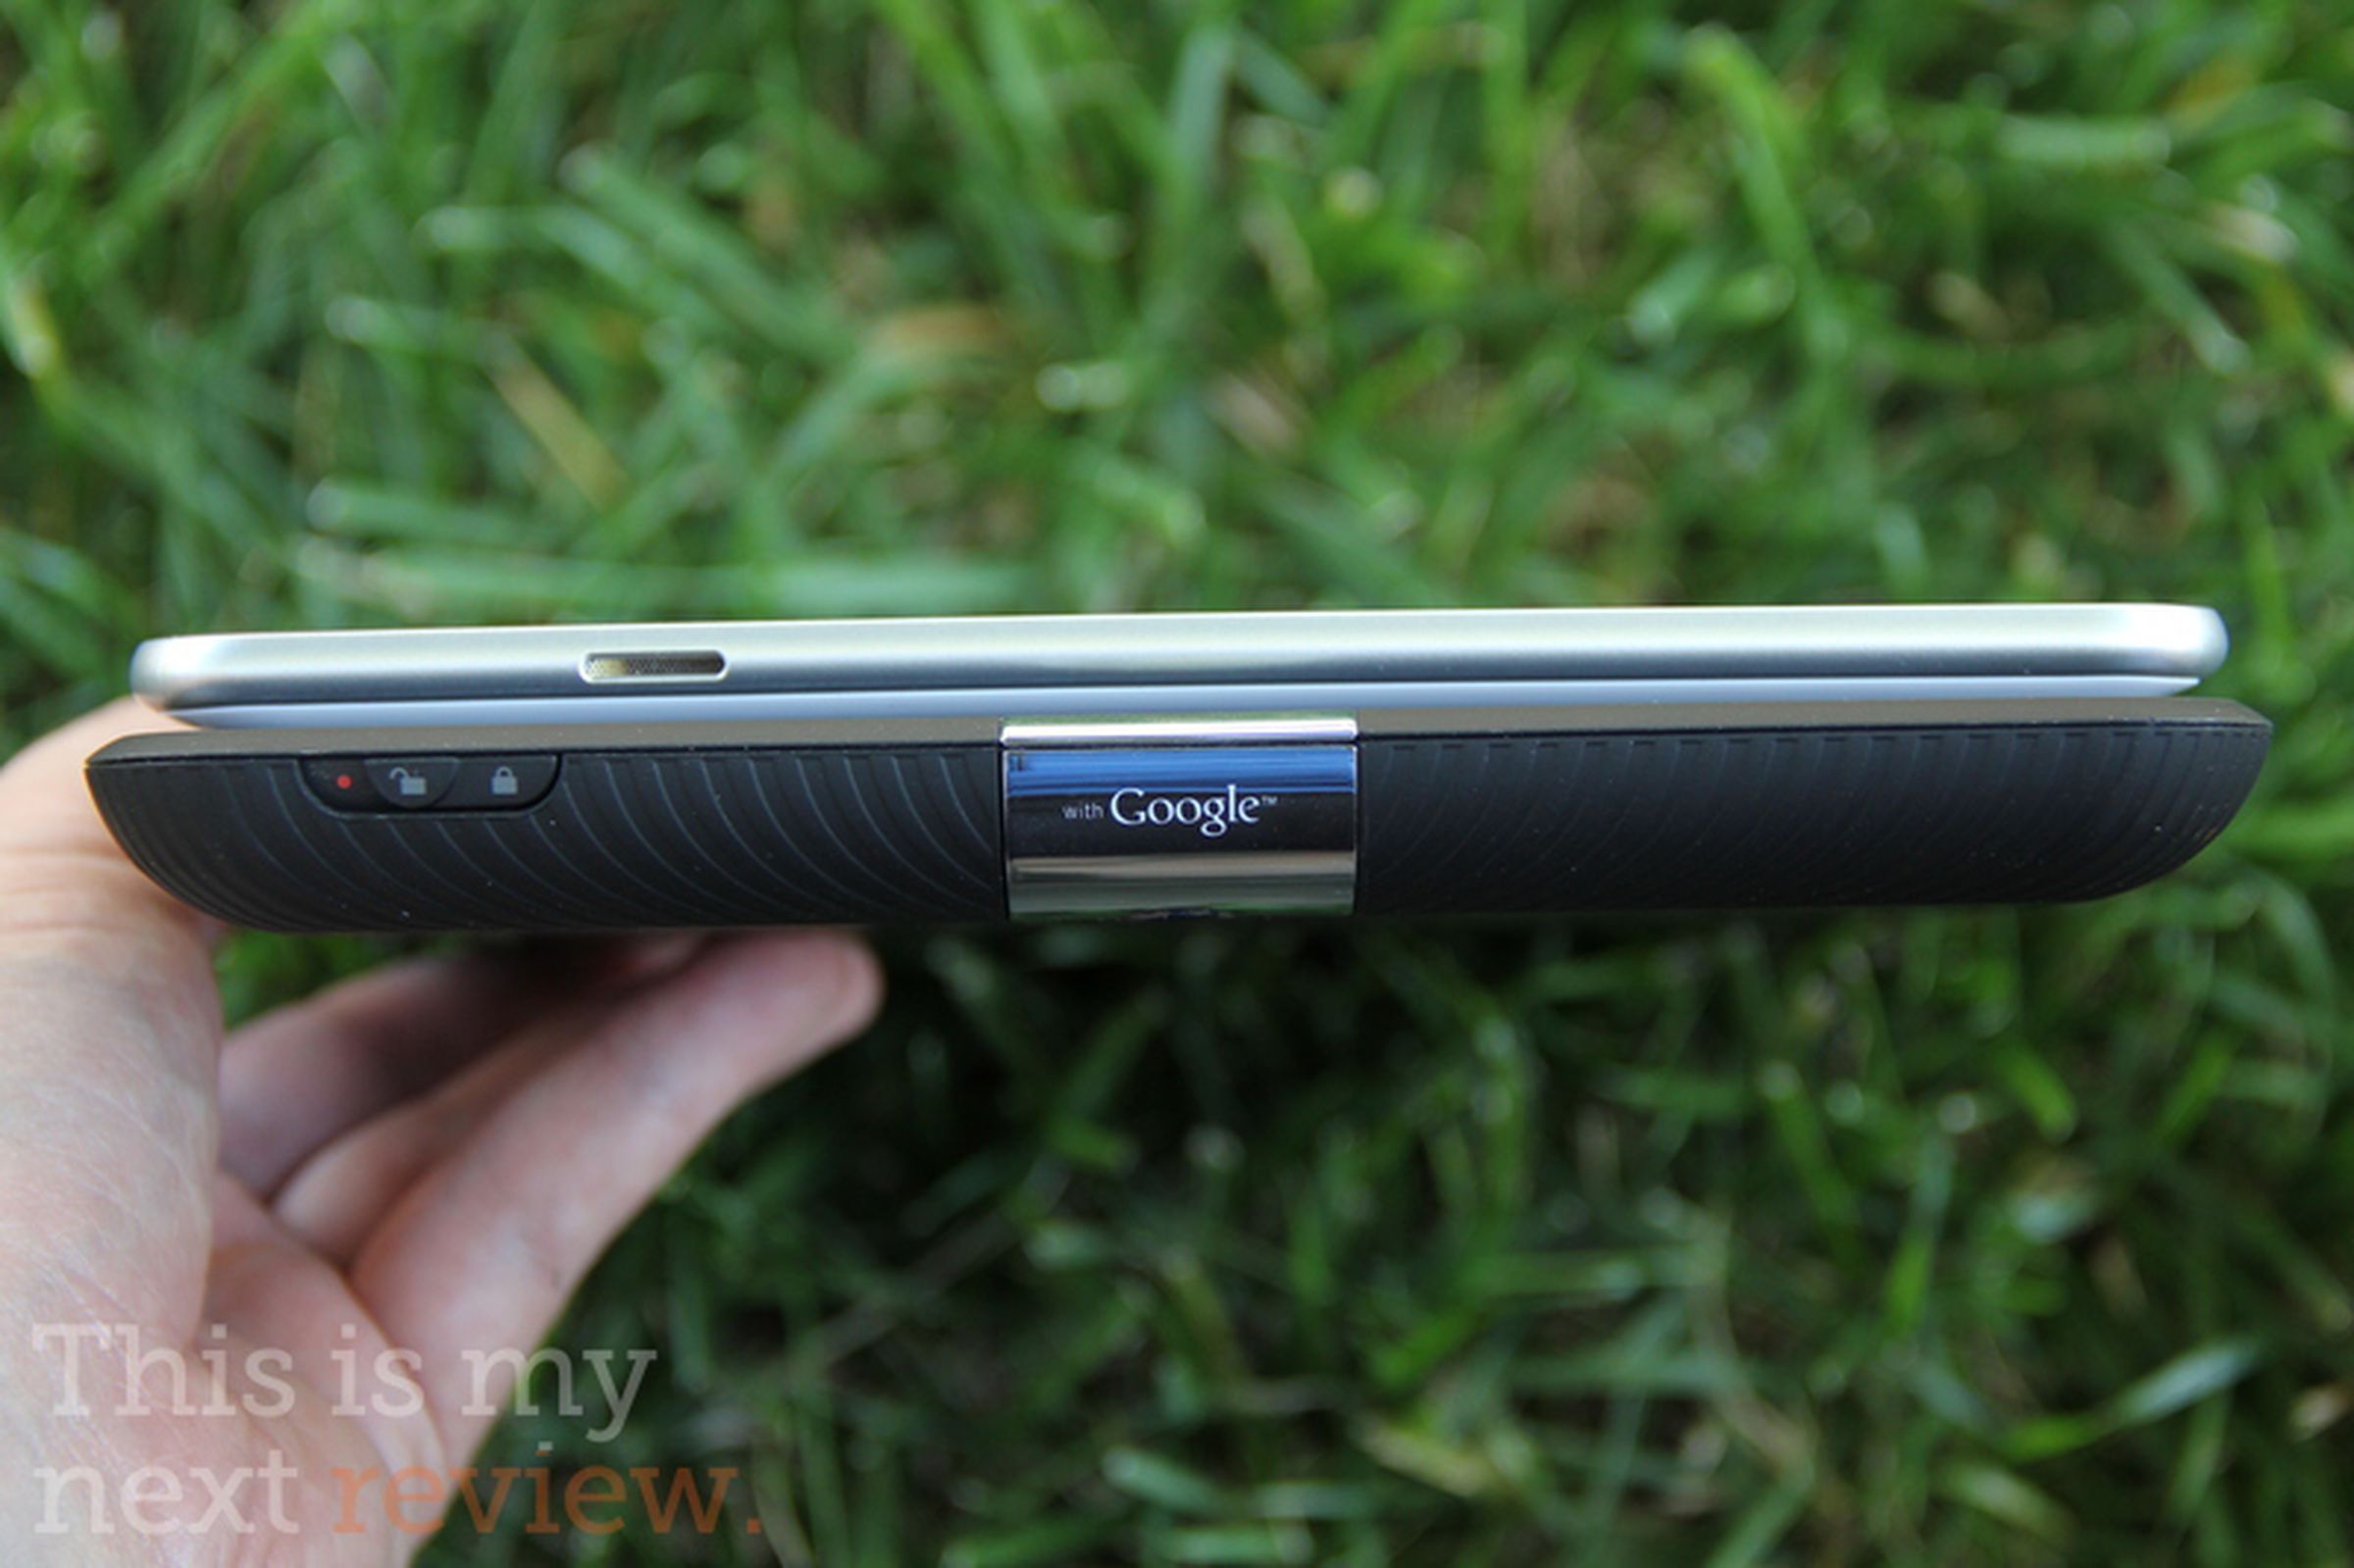 Toshiba Thrive review pictures